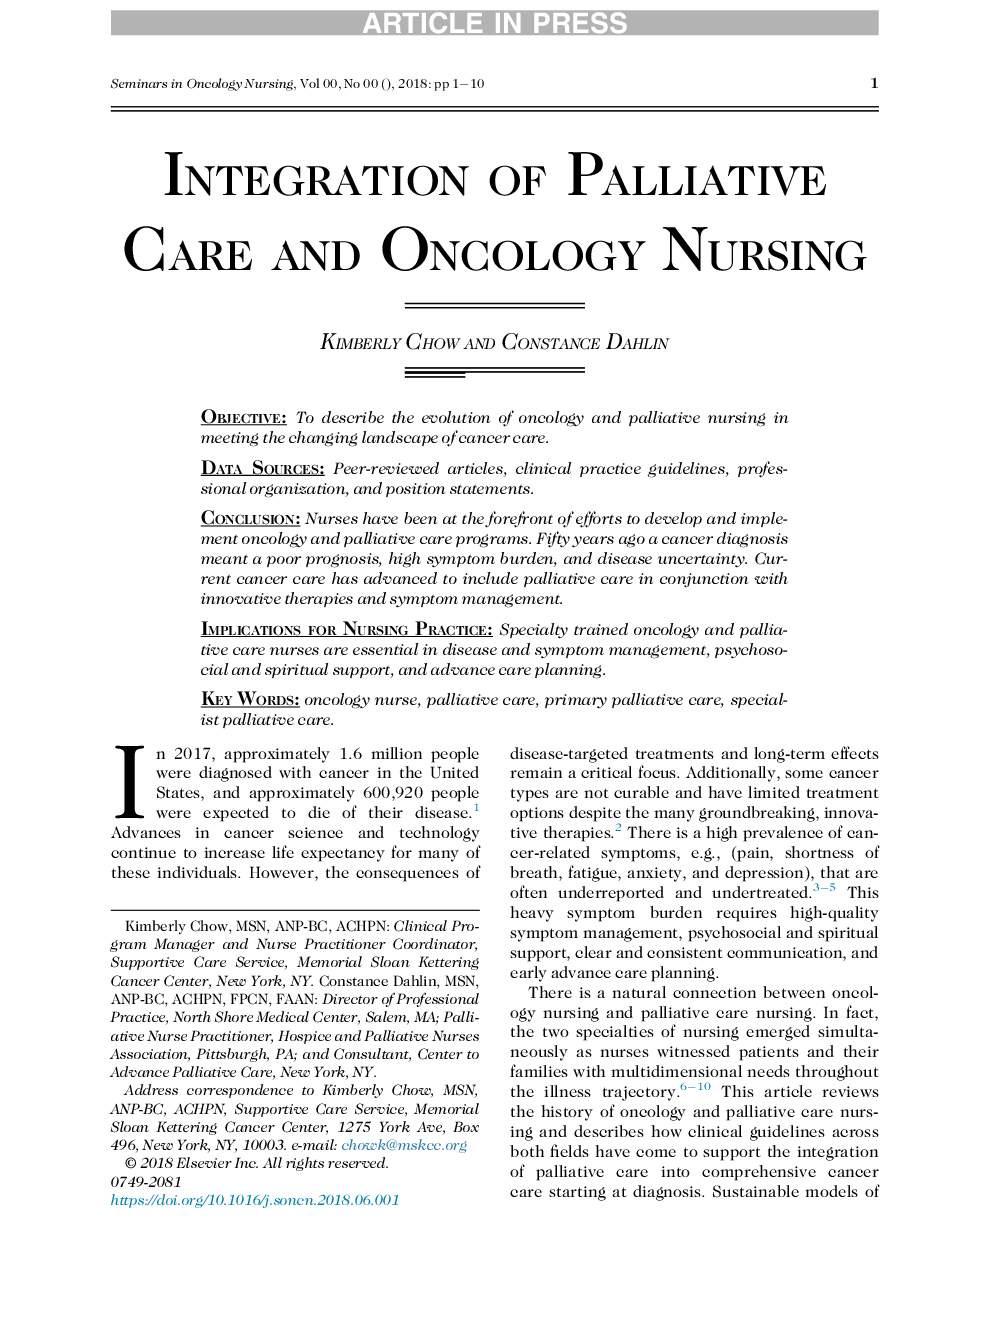 Integration of Palliative Care and Oncology Nursing